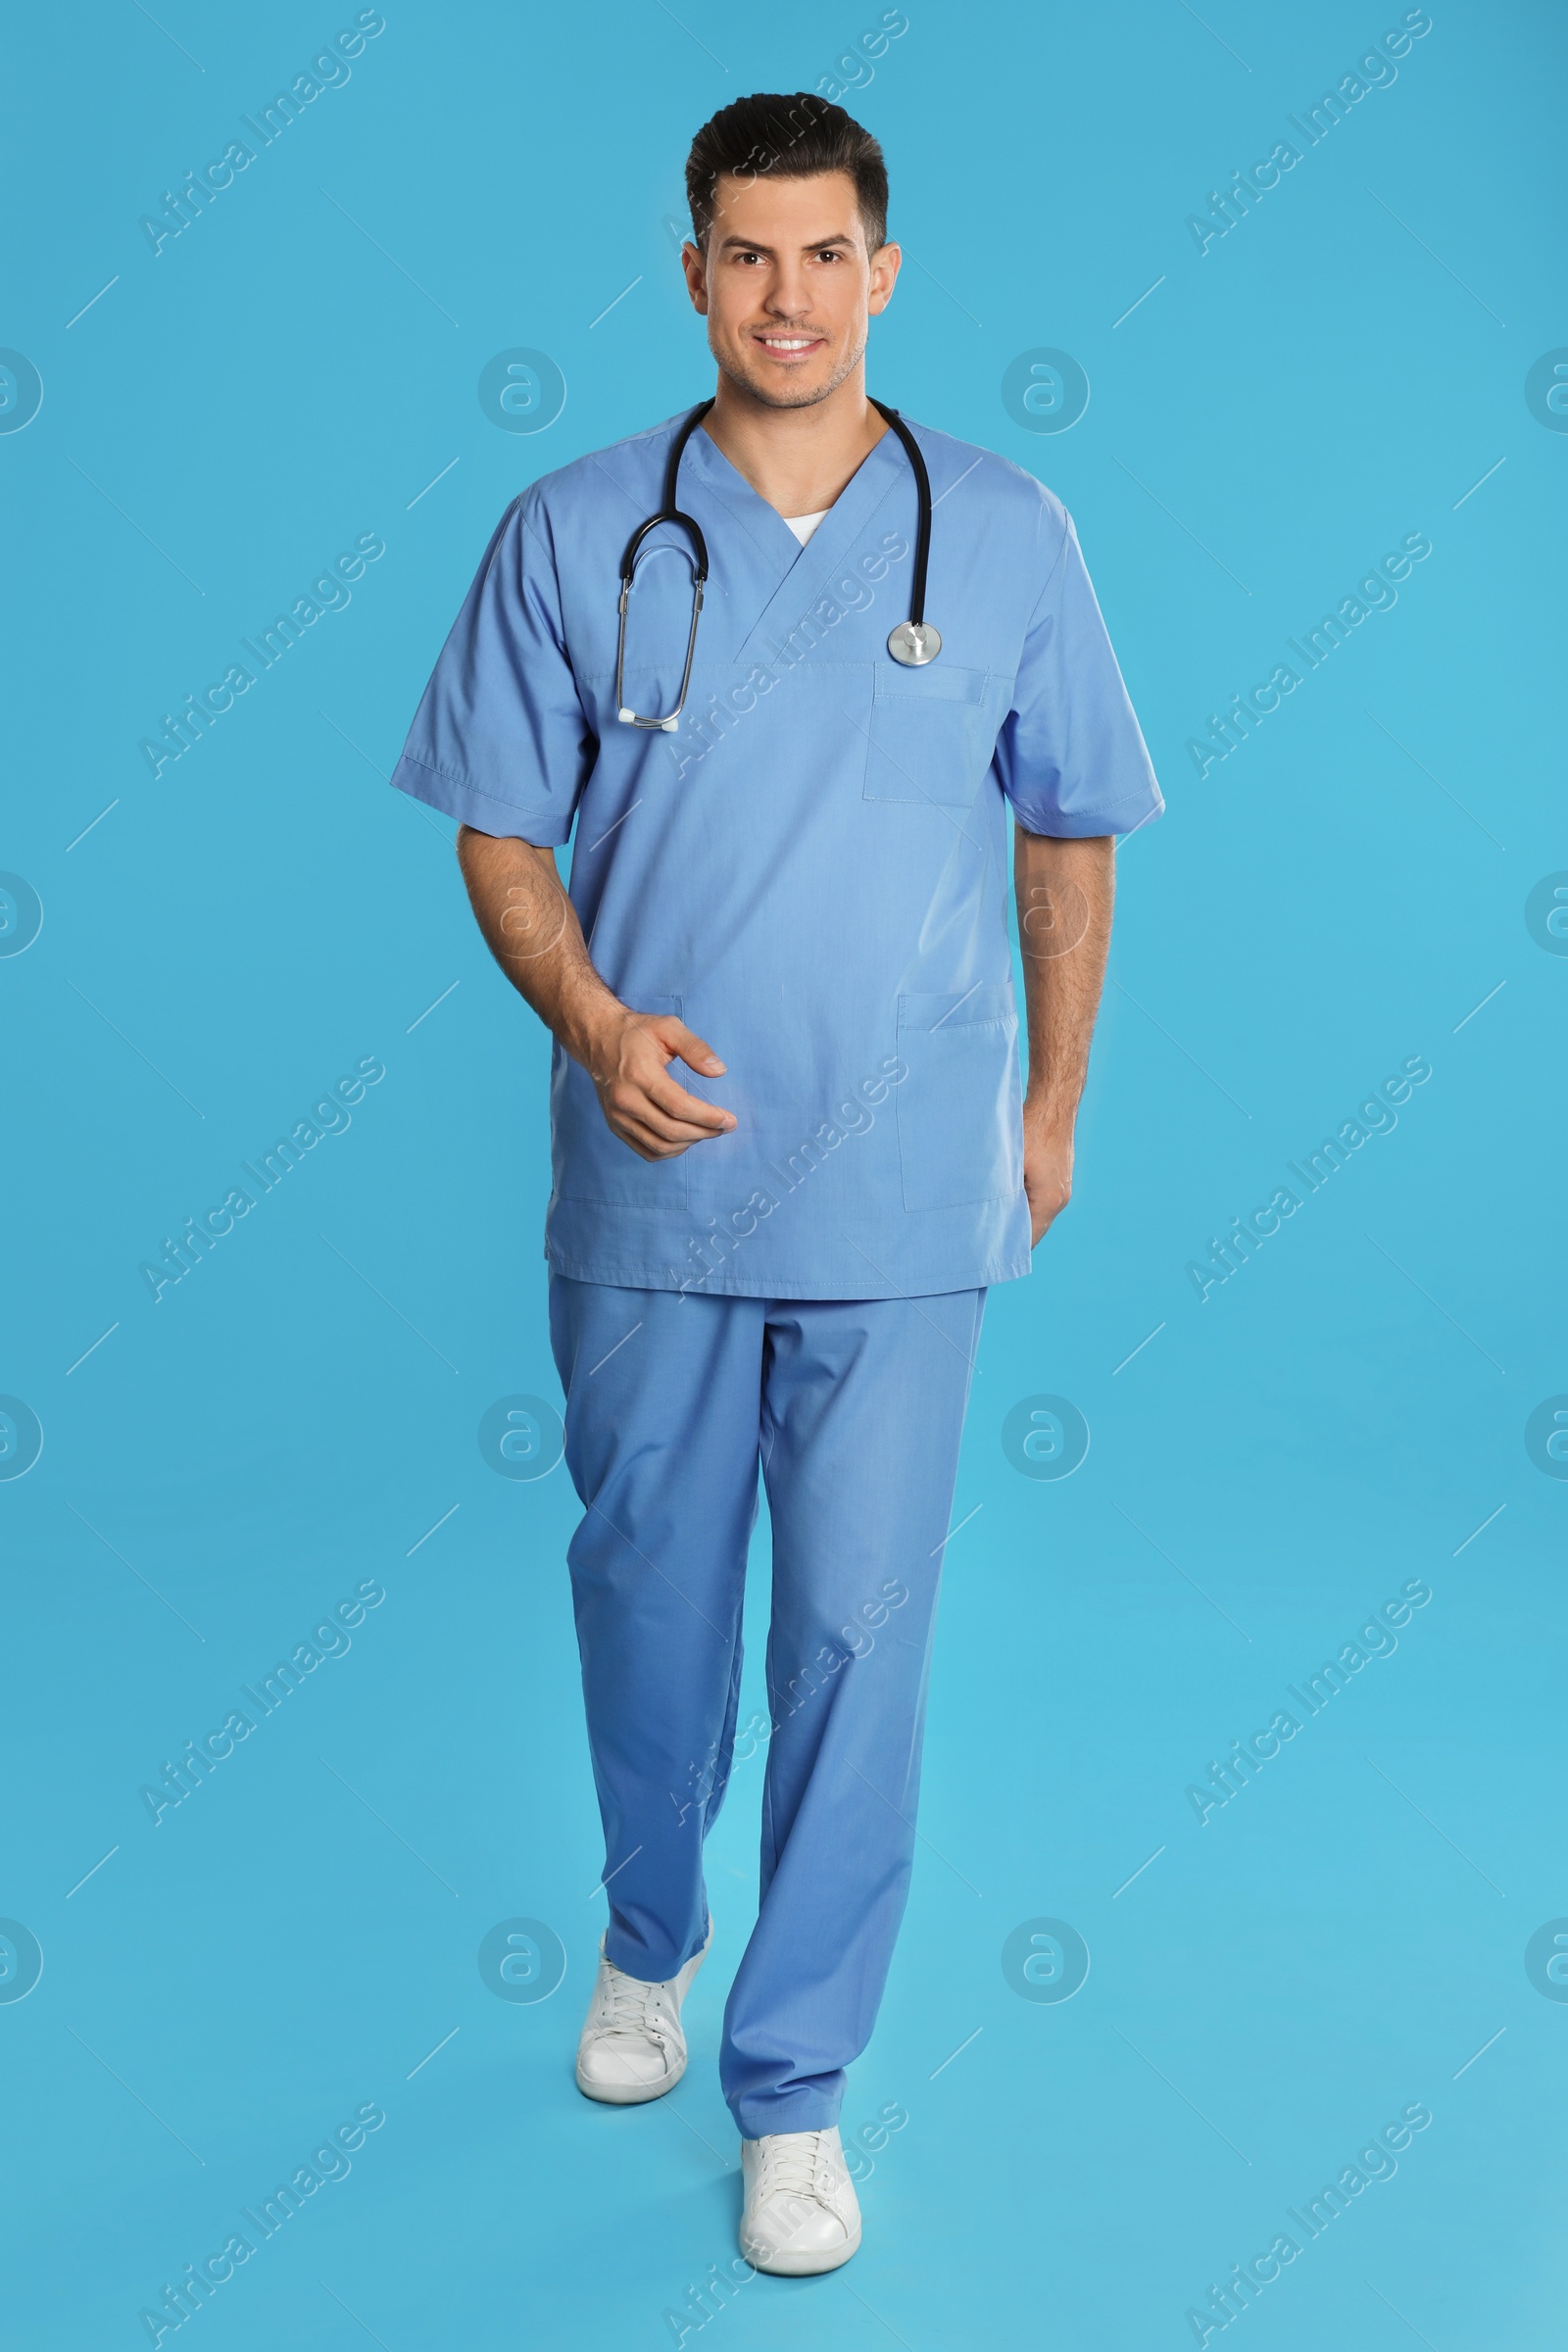 Photo of Handsome doctor in uniform walking on blue background